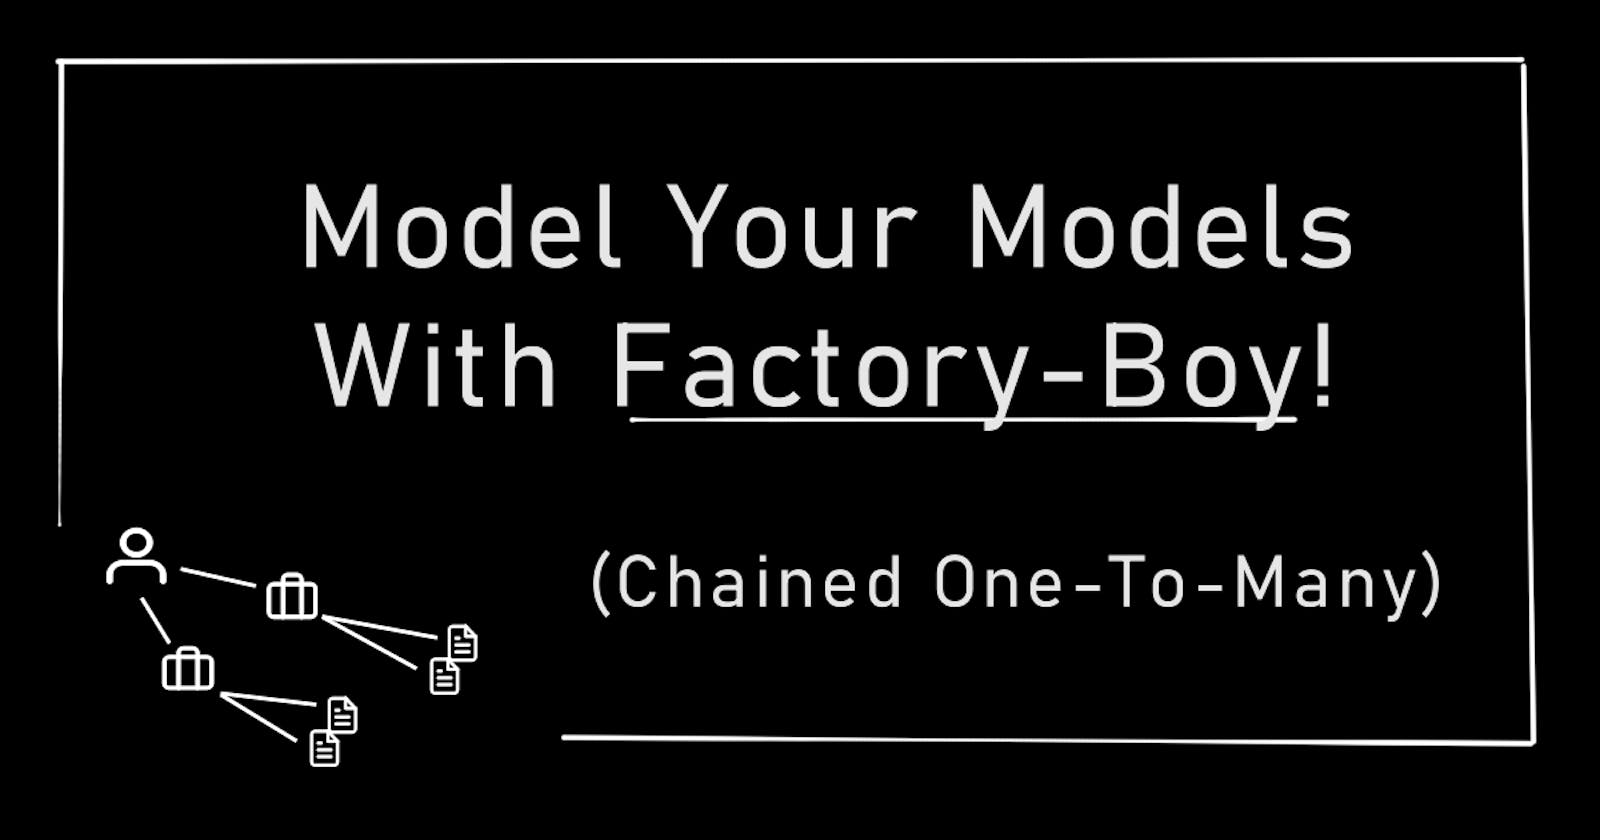 Model Your Models With Factory Boy (Setting Up Chained One-To-Many Relationships)